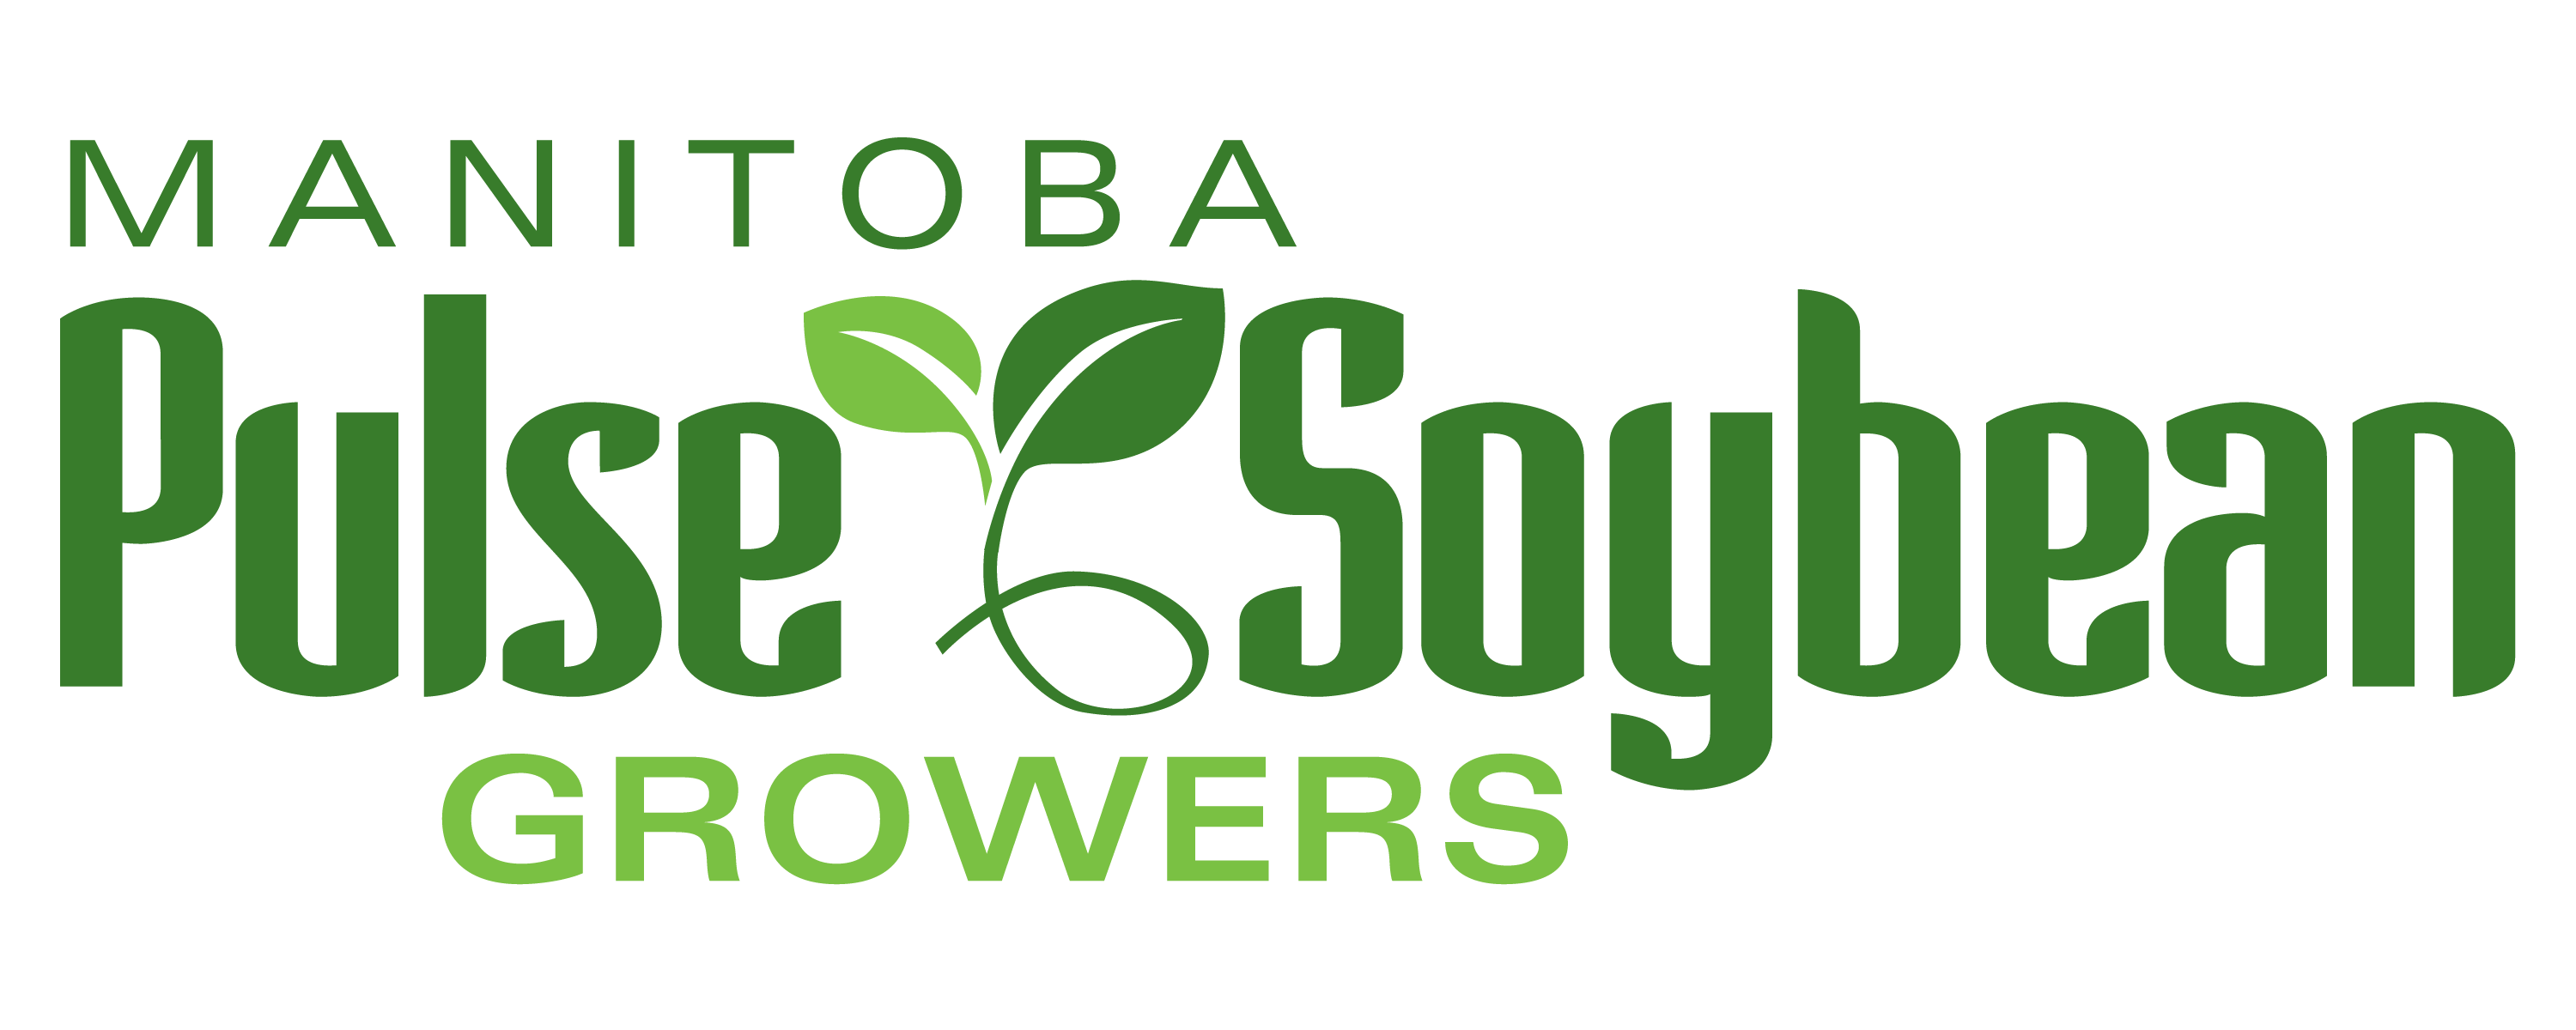 Manitoba Pulse and Soybean Growers